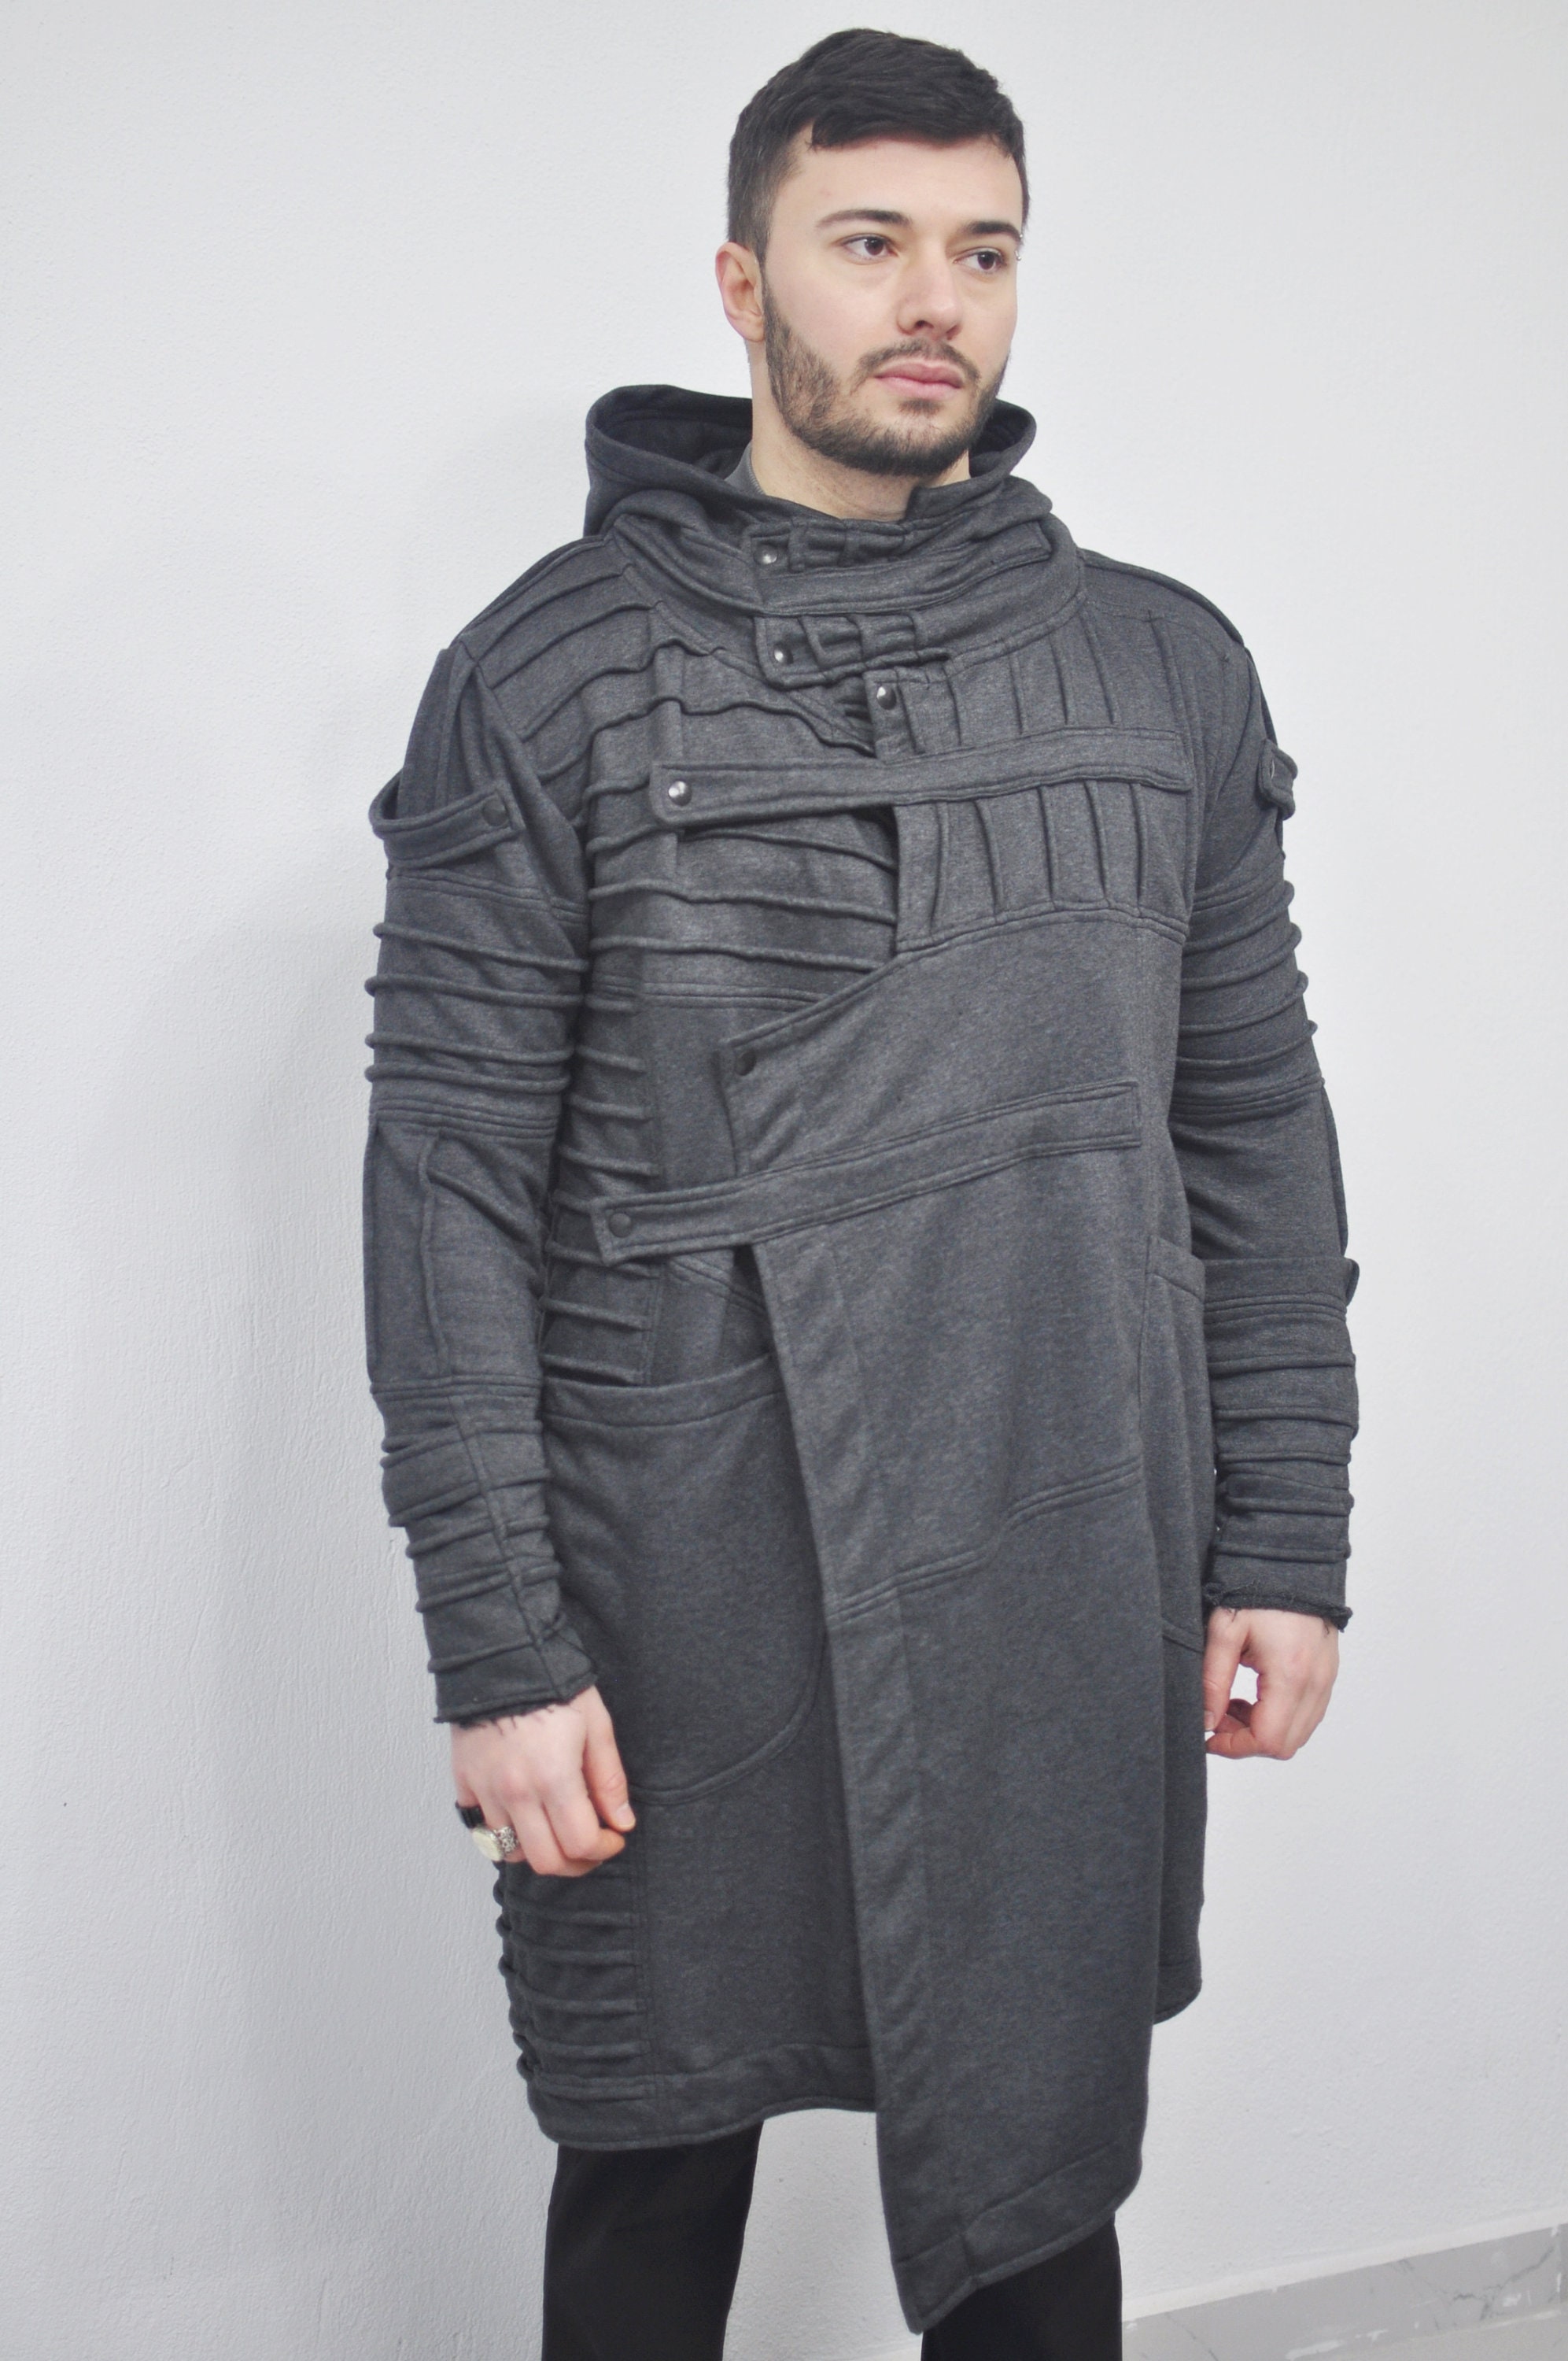 XS-8XL Men's Black Quilted Sleeves Cardigan Loose Jacket,cyber Goth ...